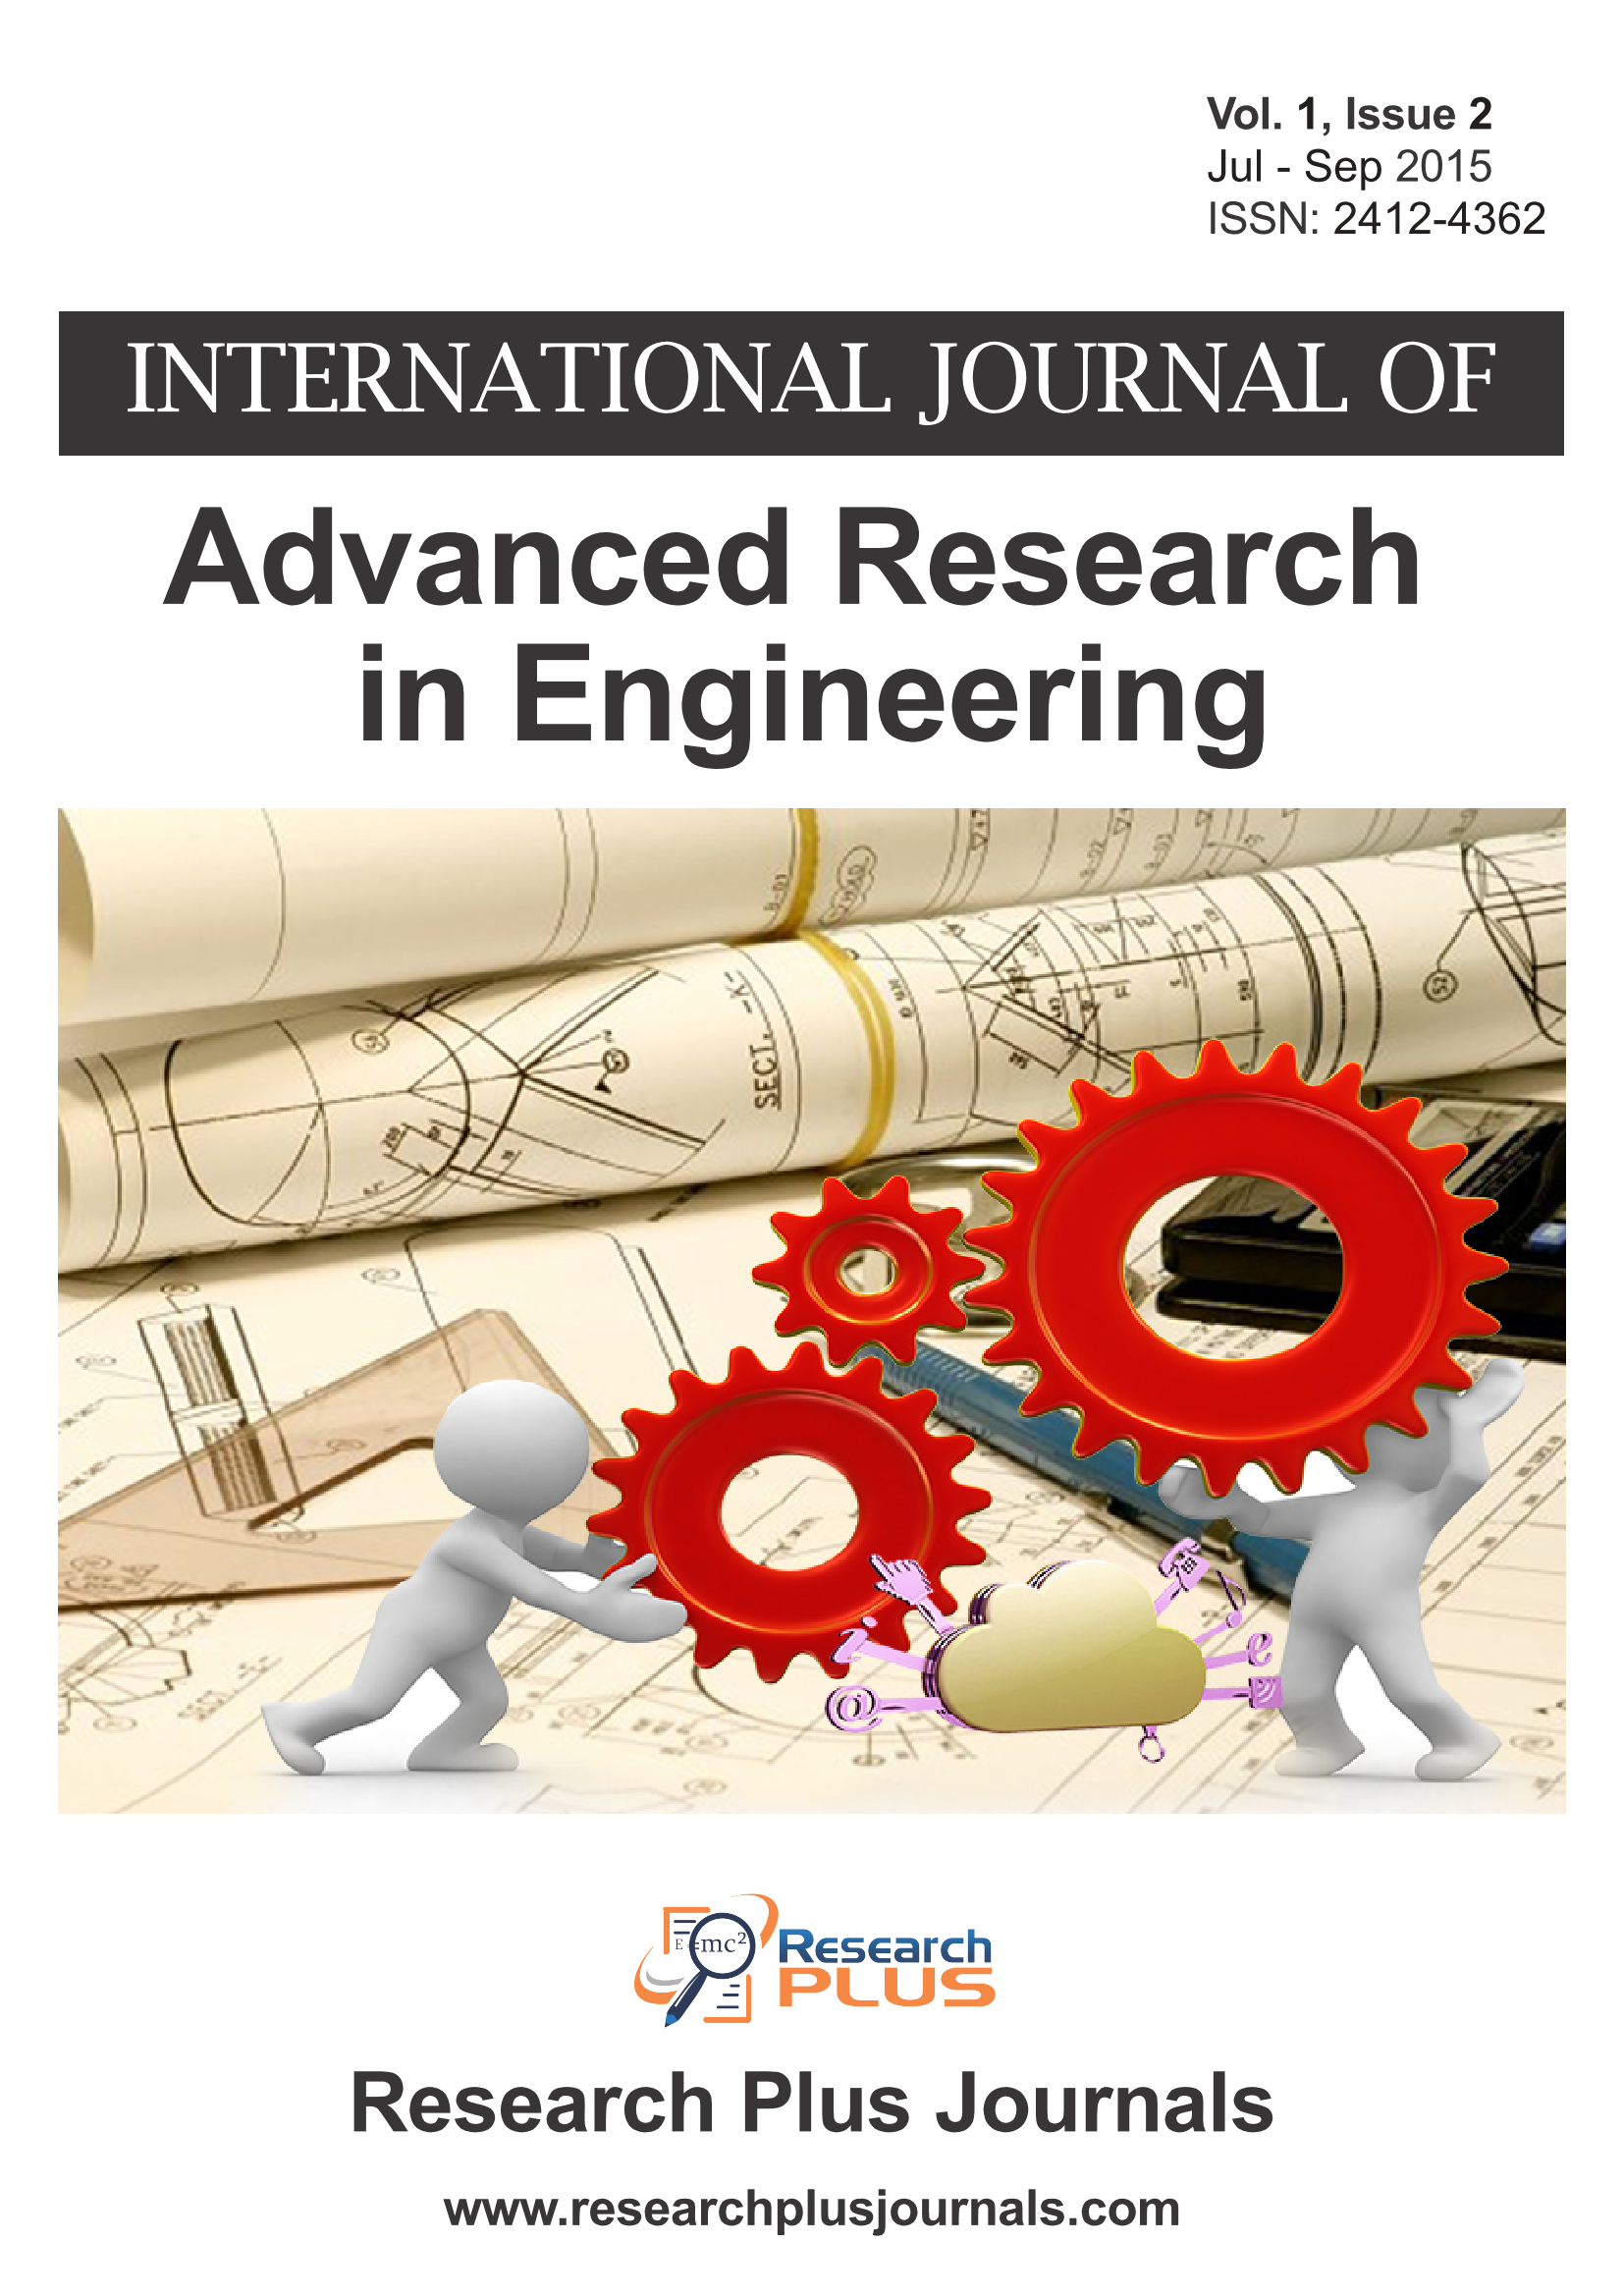 Volume 1, Issue 2, International Journal of Advanced Research in Engineering (IJARE)  (Online ISSN 2412-4362)